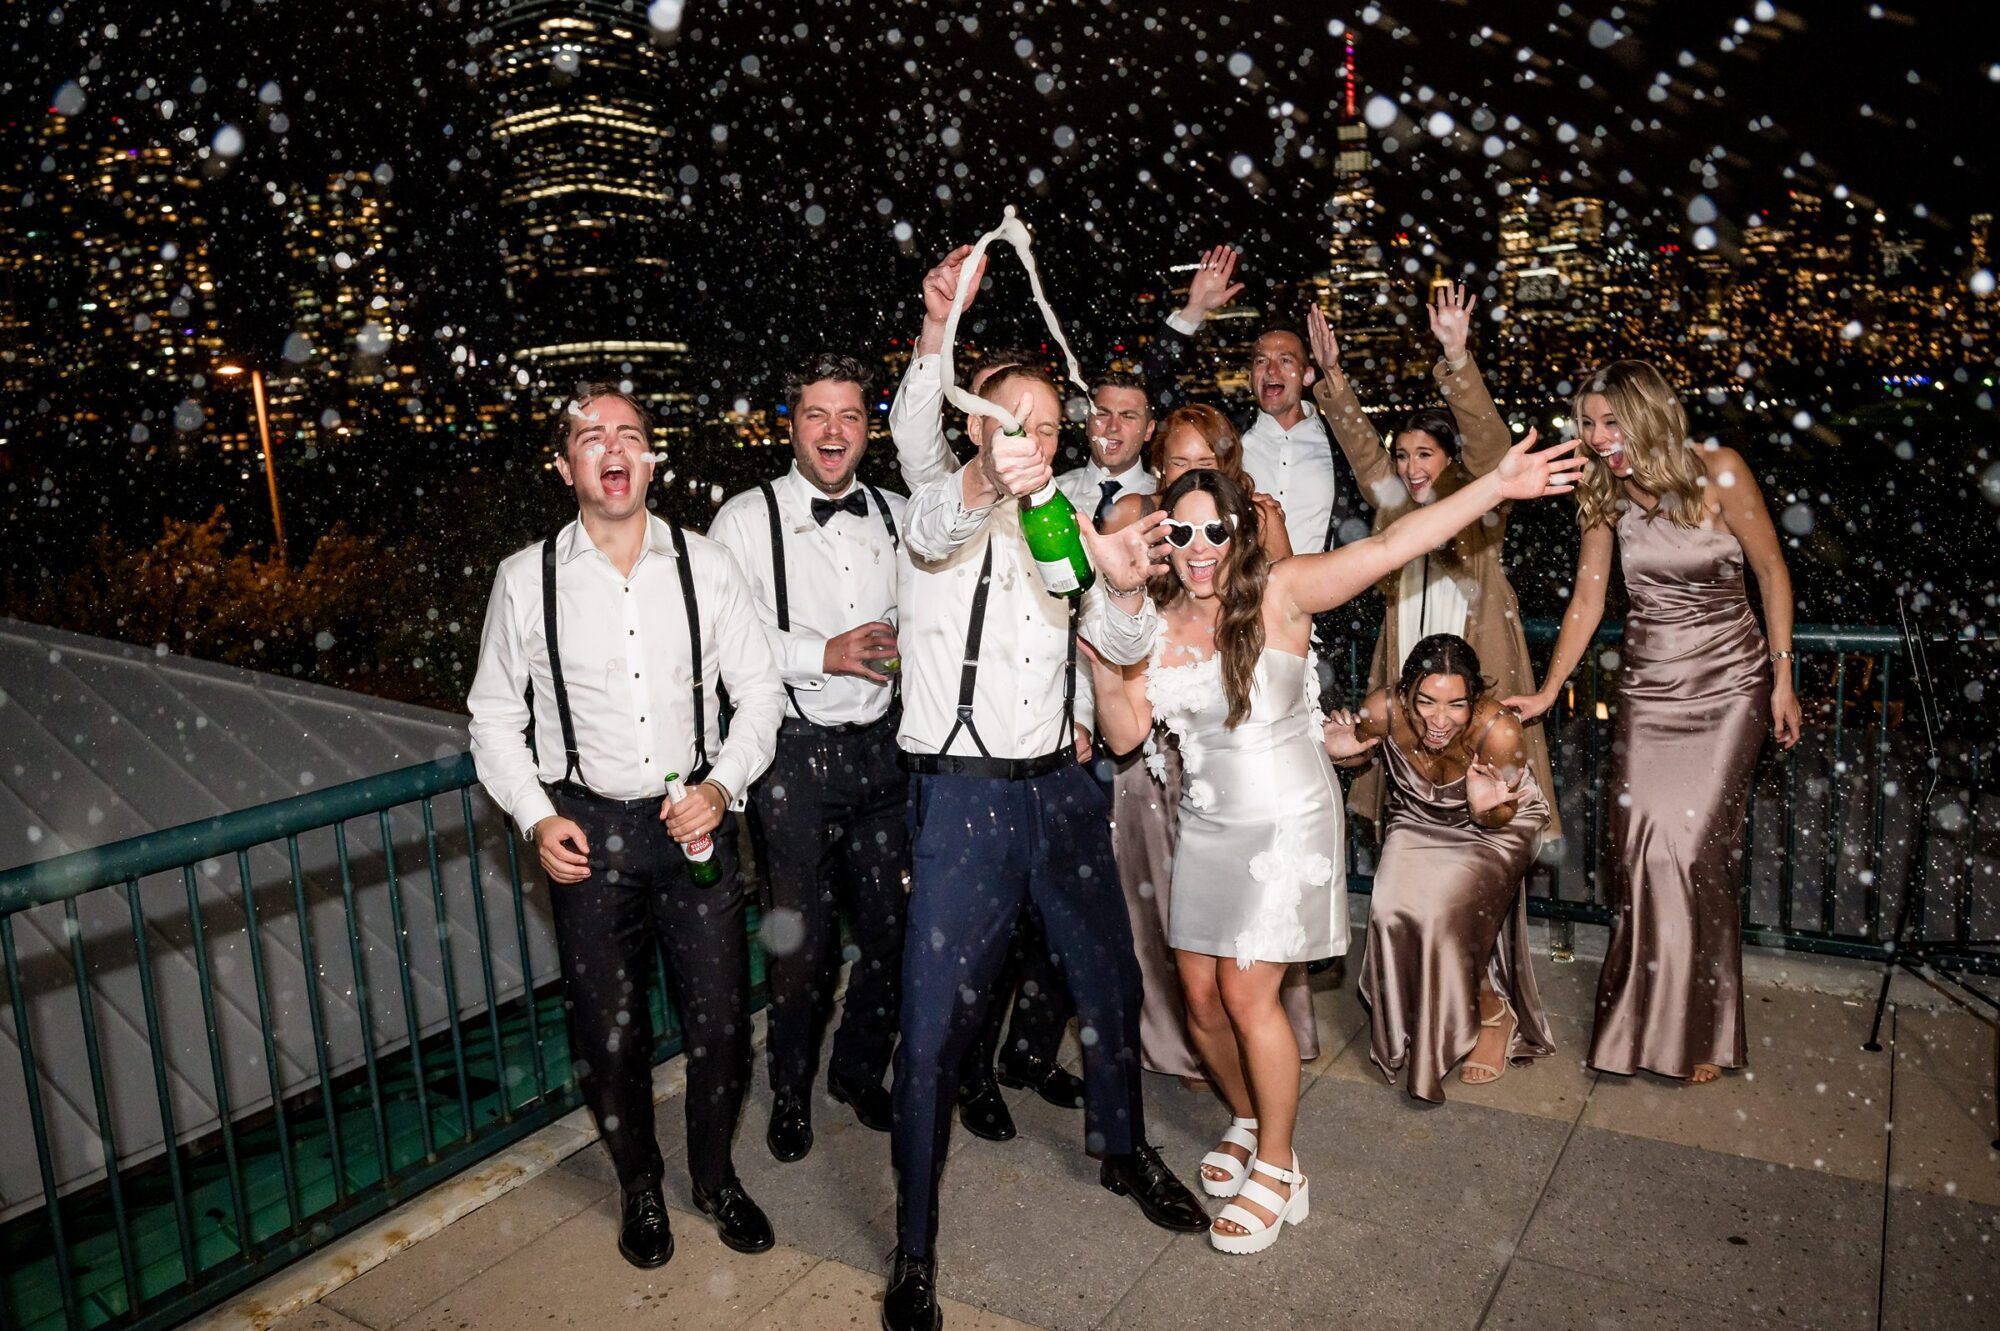 A wedding party at Liberty House celebrating with champagne.